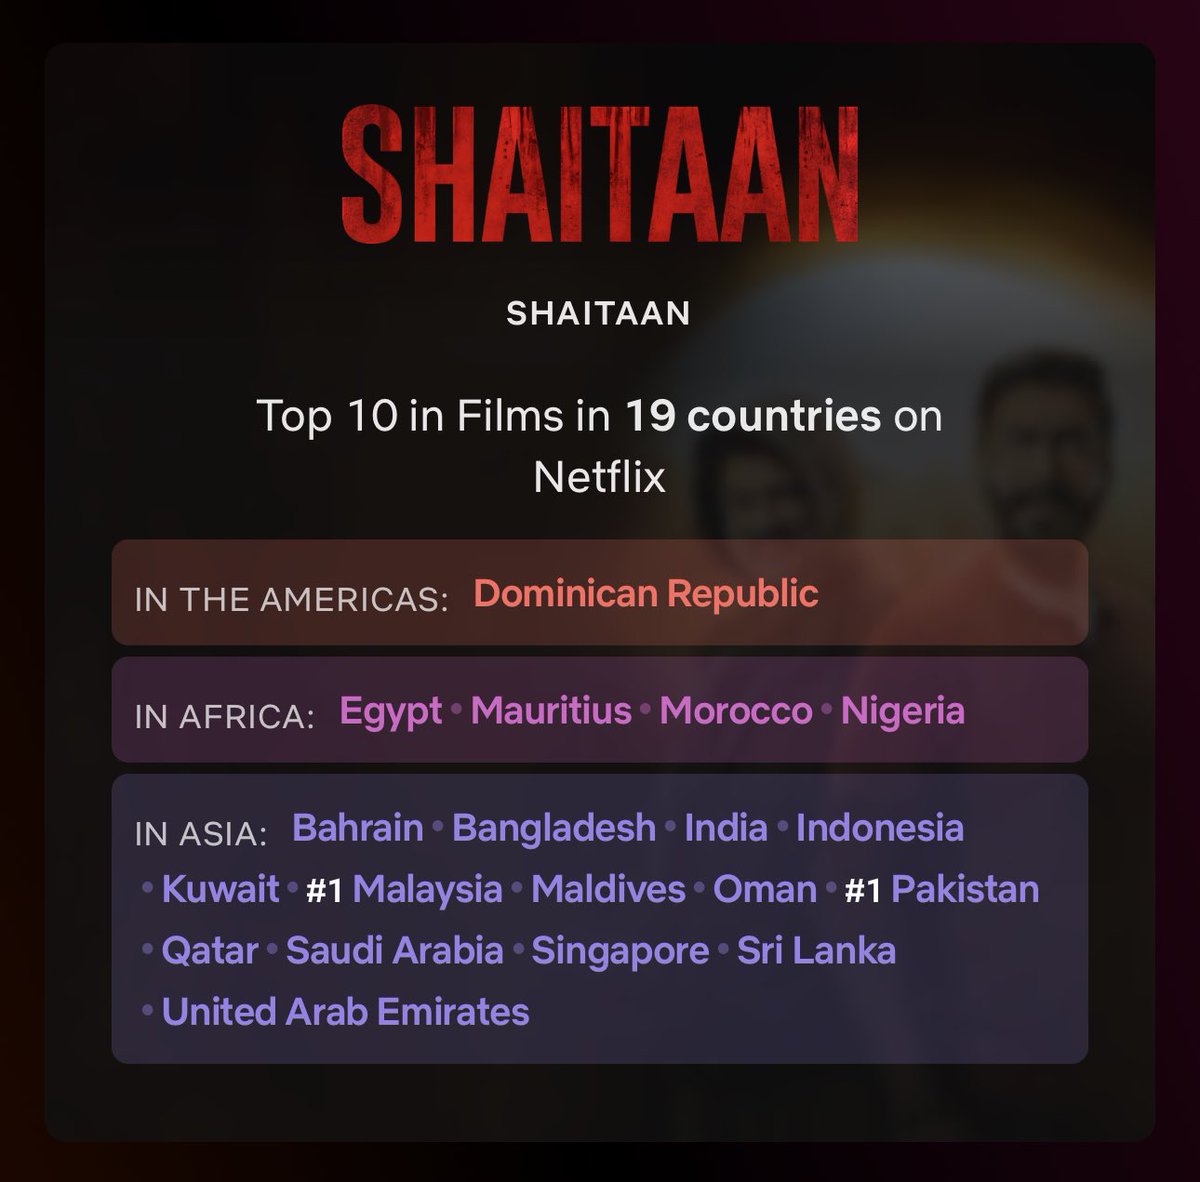 #Shaitaan spends THIRD CONSECUTIVE WEEK on the Netflix Global Top 10 Non-English Films Chart with 3.2 million views in the week ending 19 May. The Hindi home invasion horror-thriller, directed by #VikasBahl, starring #AjayDevgn, #Jyotika, #RMadhavan and #JankiBodiwala is